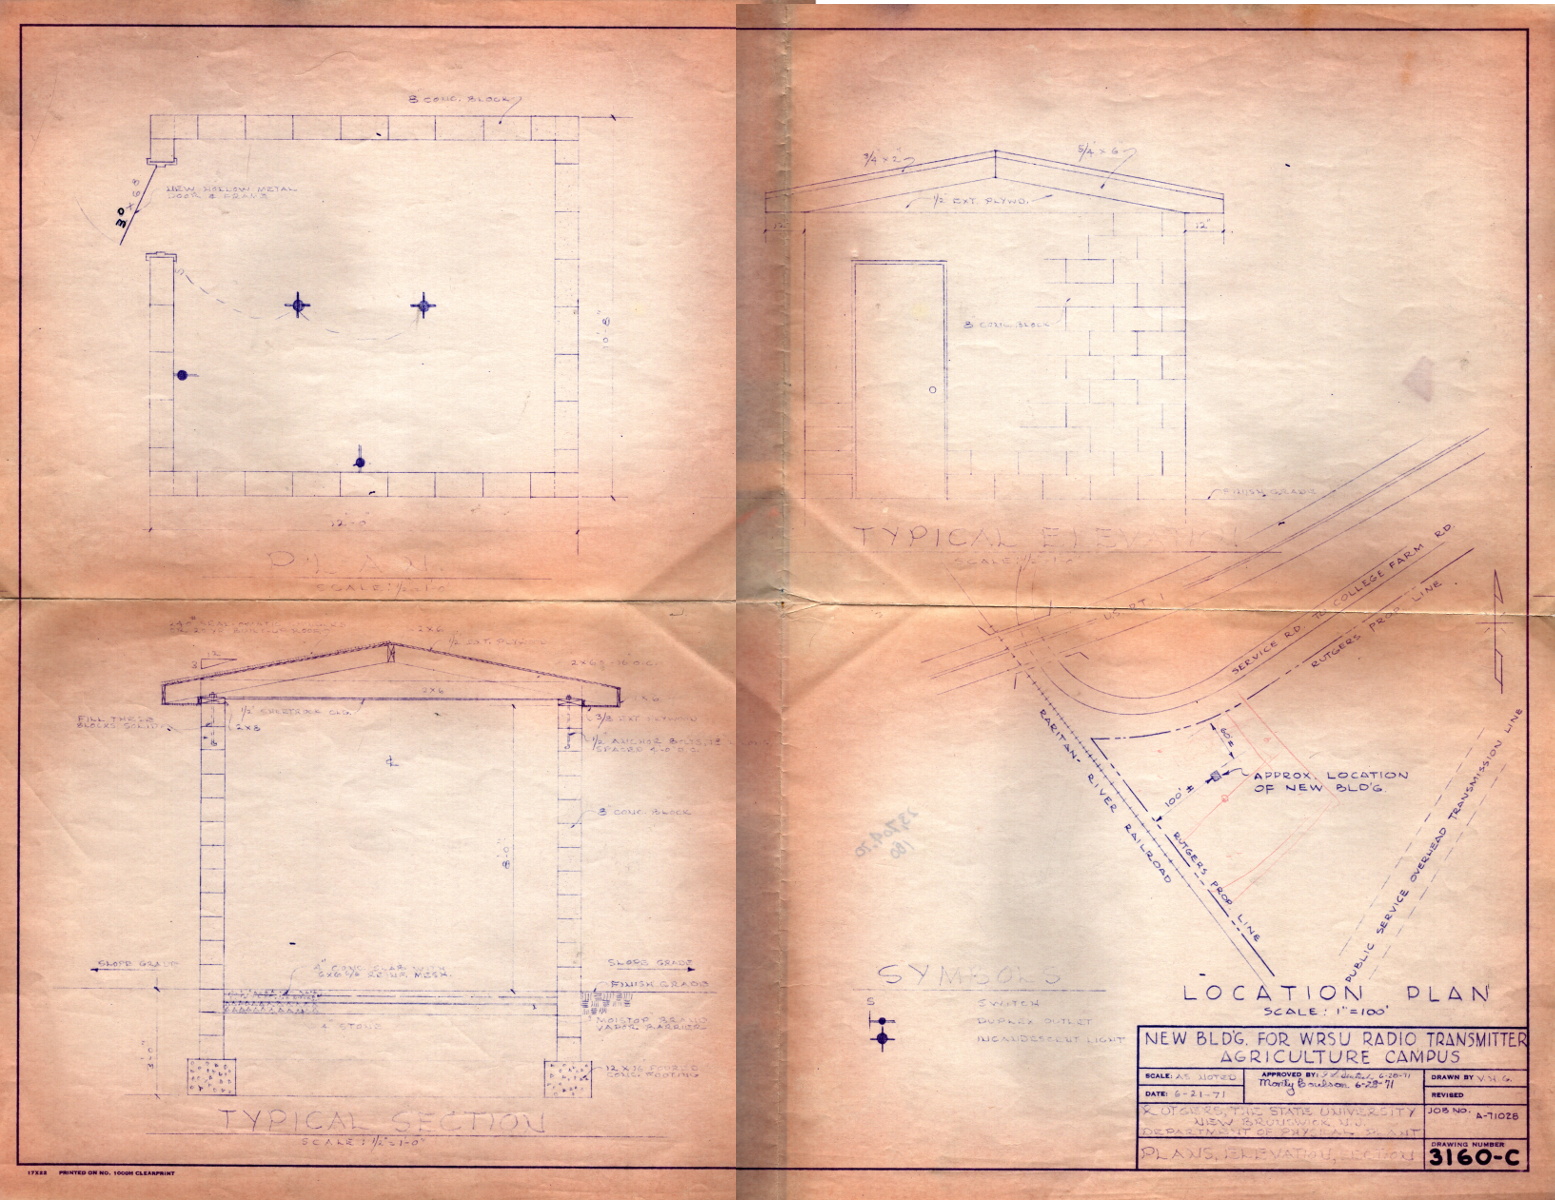 1971 - The Blue Prints for the Transmitter Building.